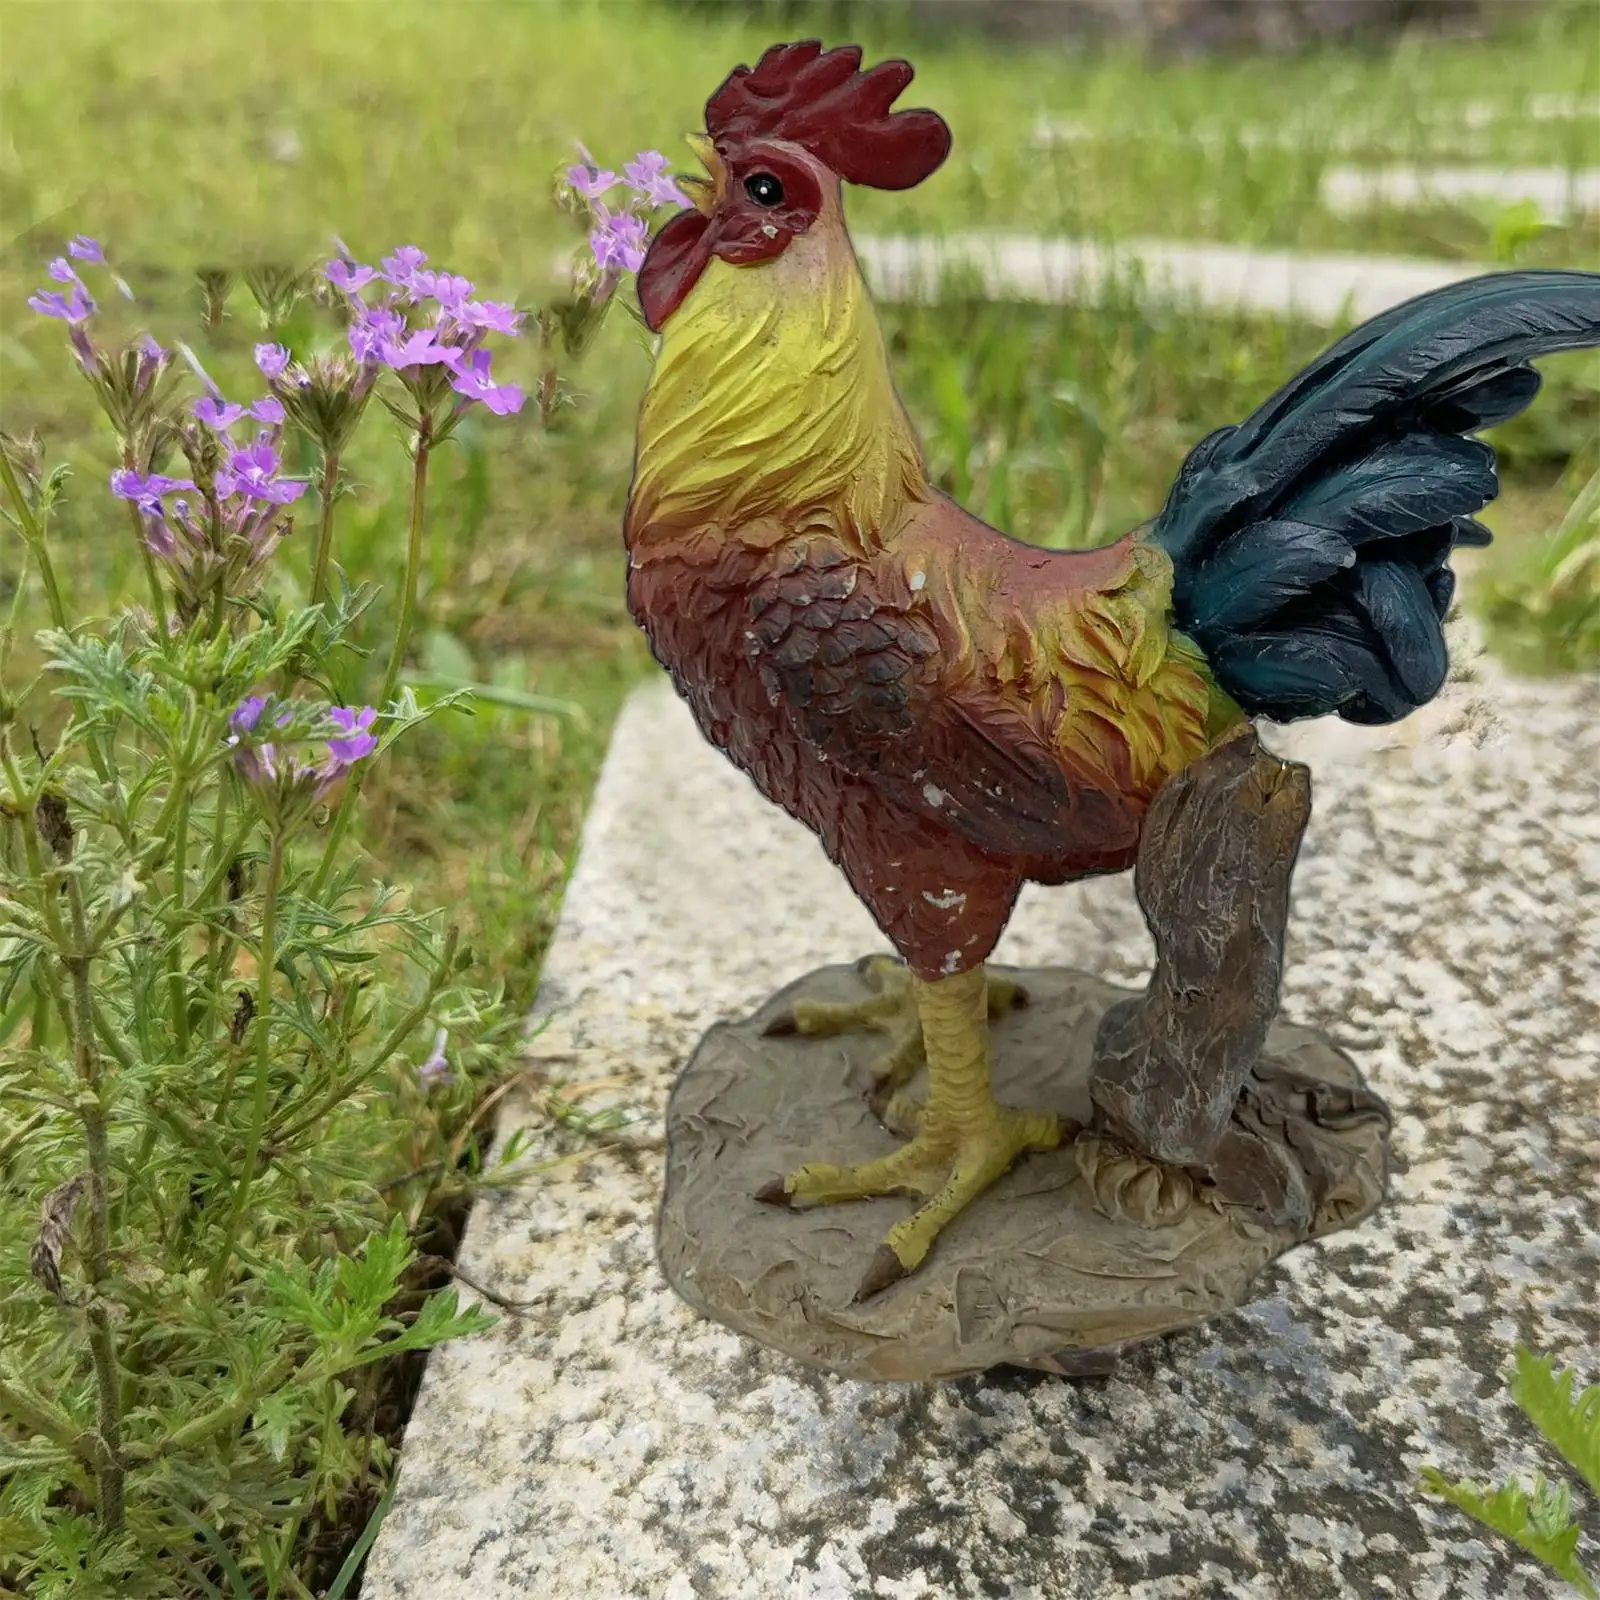 Rooster Statue Artwork Crafts Simulation Rooster Decoration Rooster Ornament Chicken Statue for Backyard Yard Lawn Patio Home